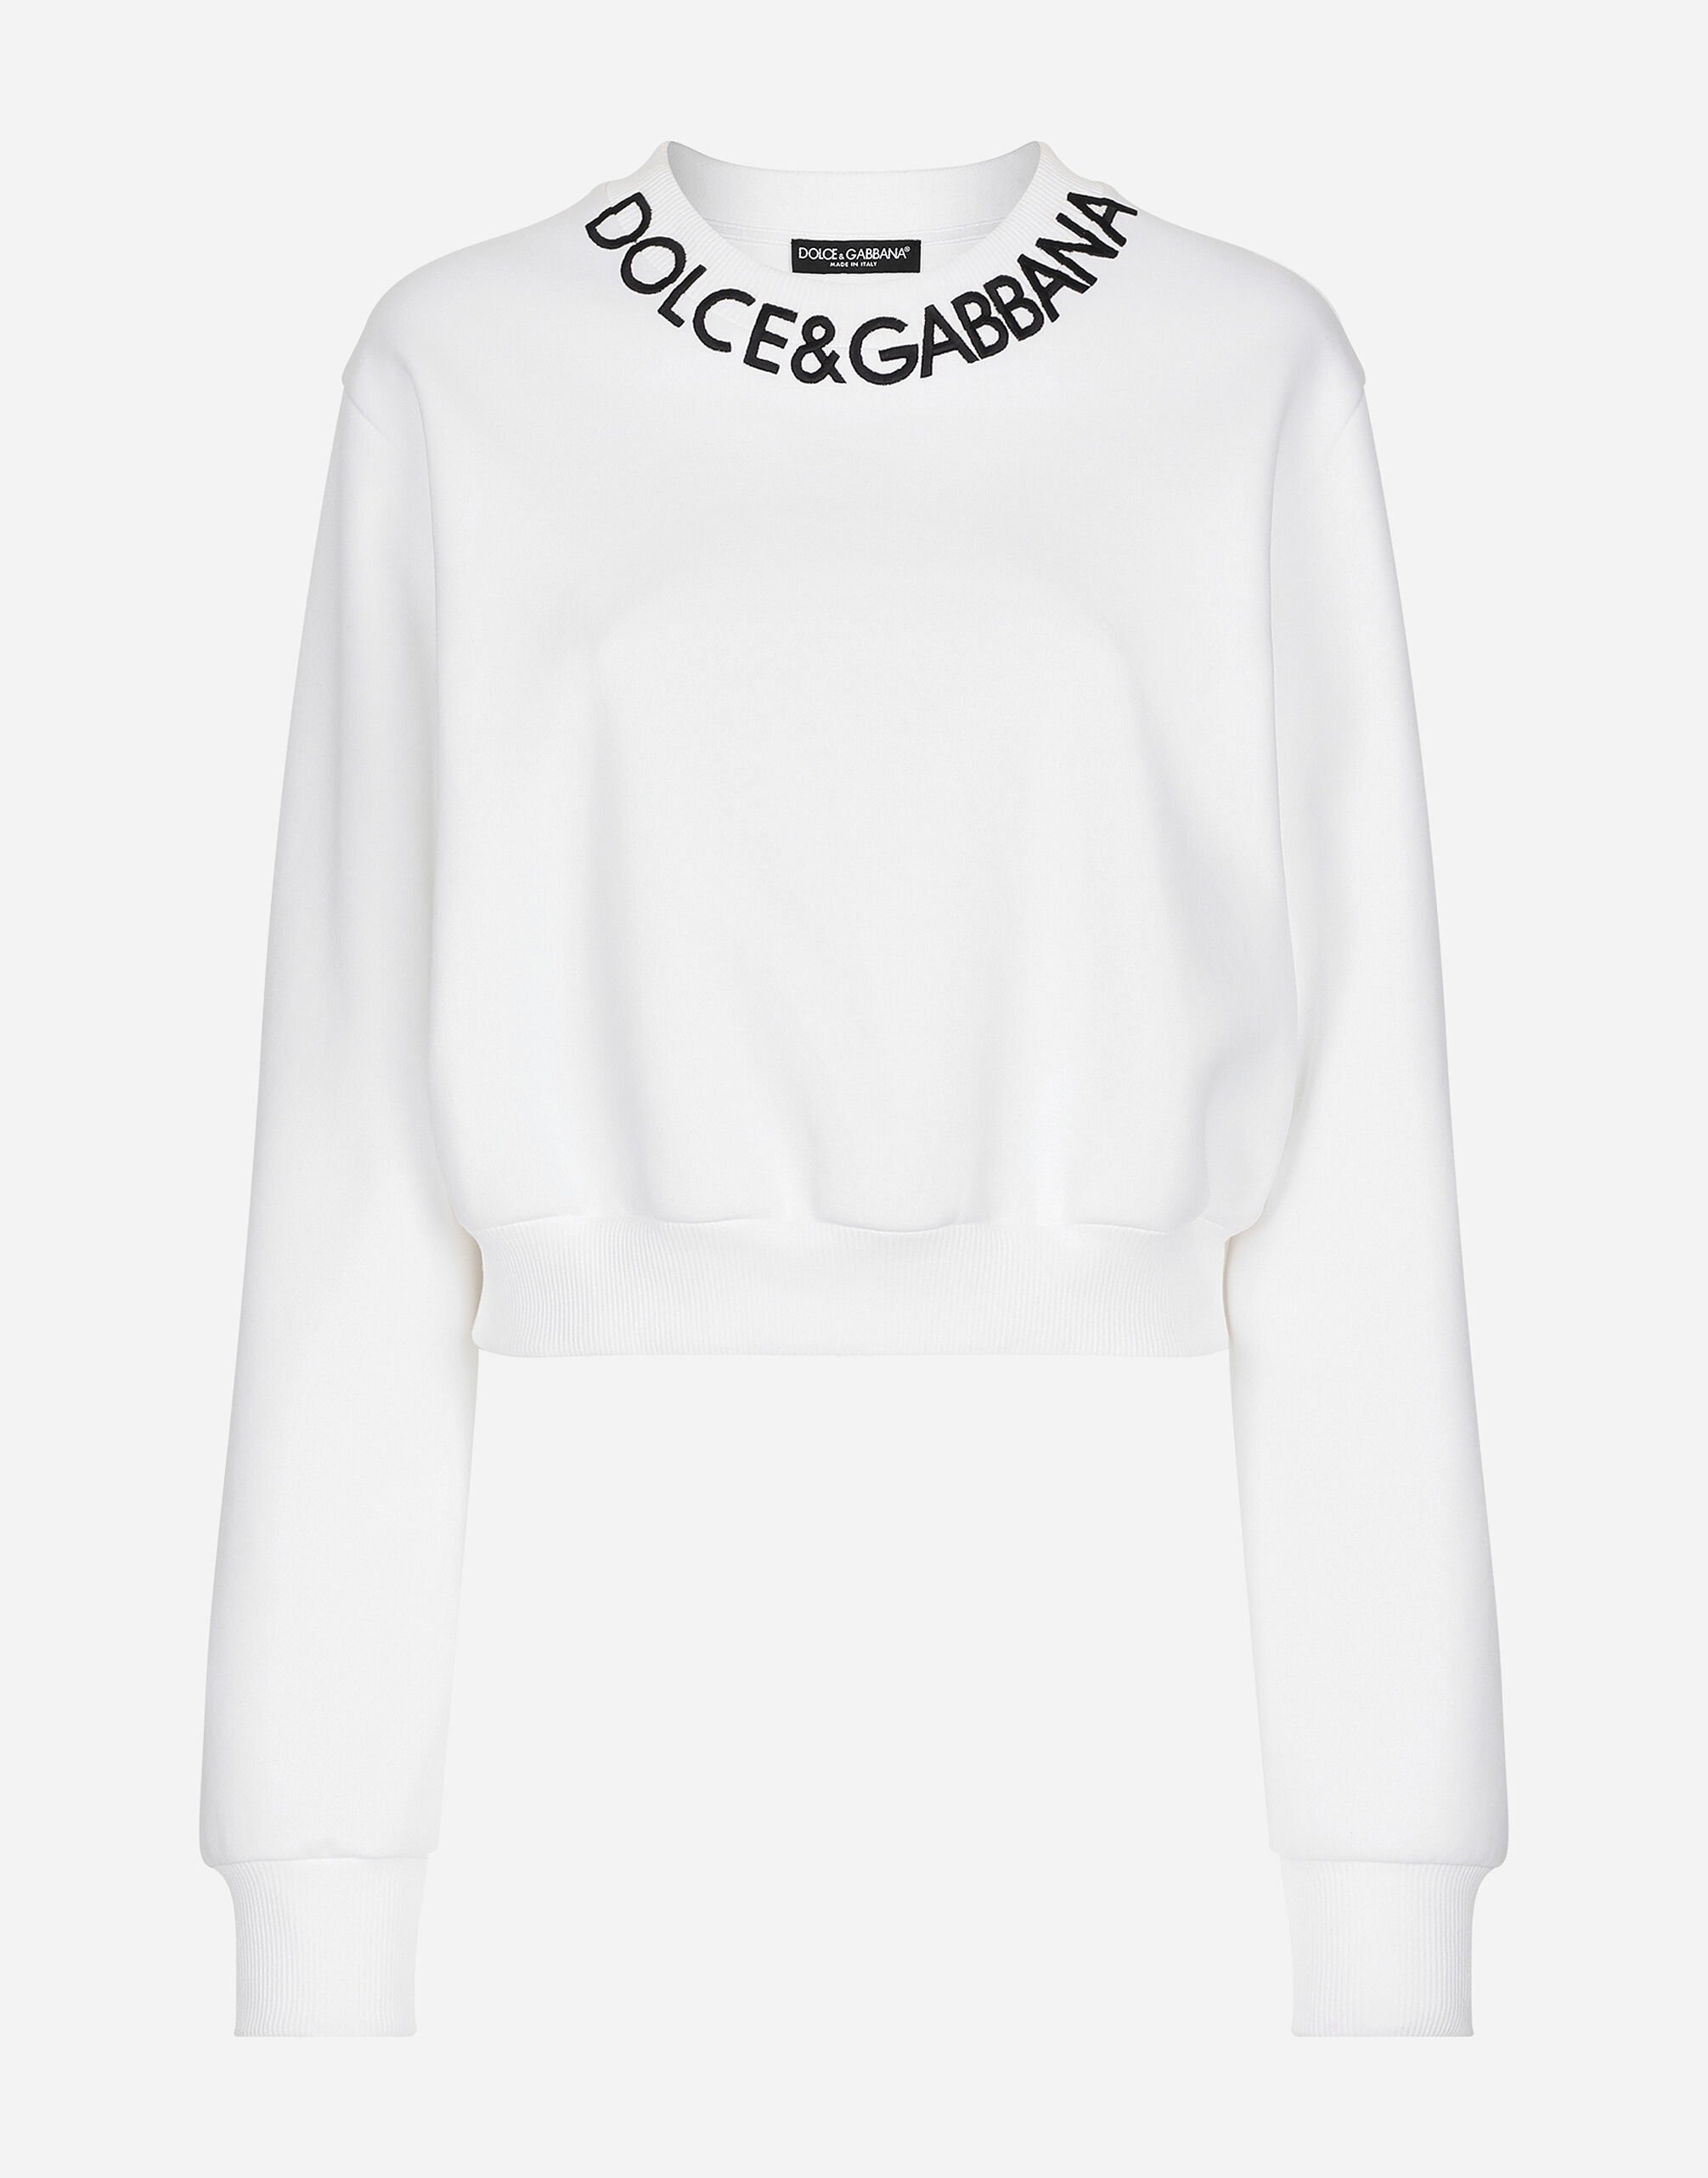 Dolce & Gabbana Cropped jersey sweatshirt with logo embroidery on neck White FXZ05TJFMEB